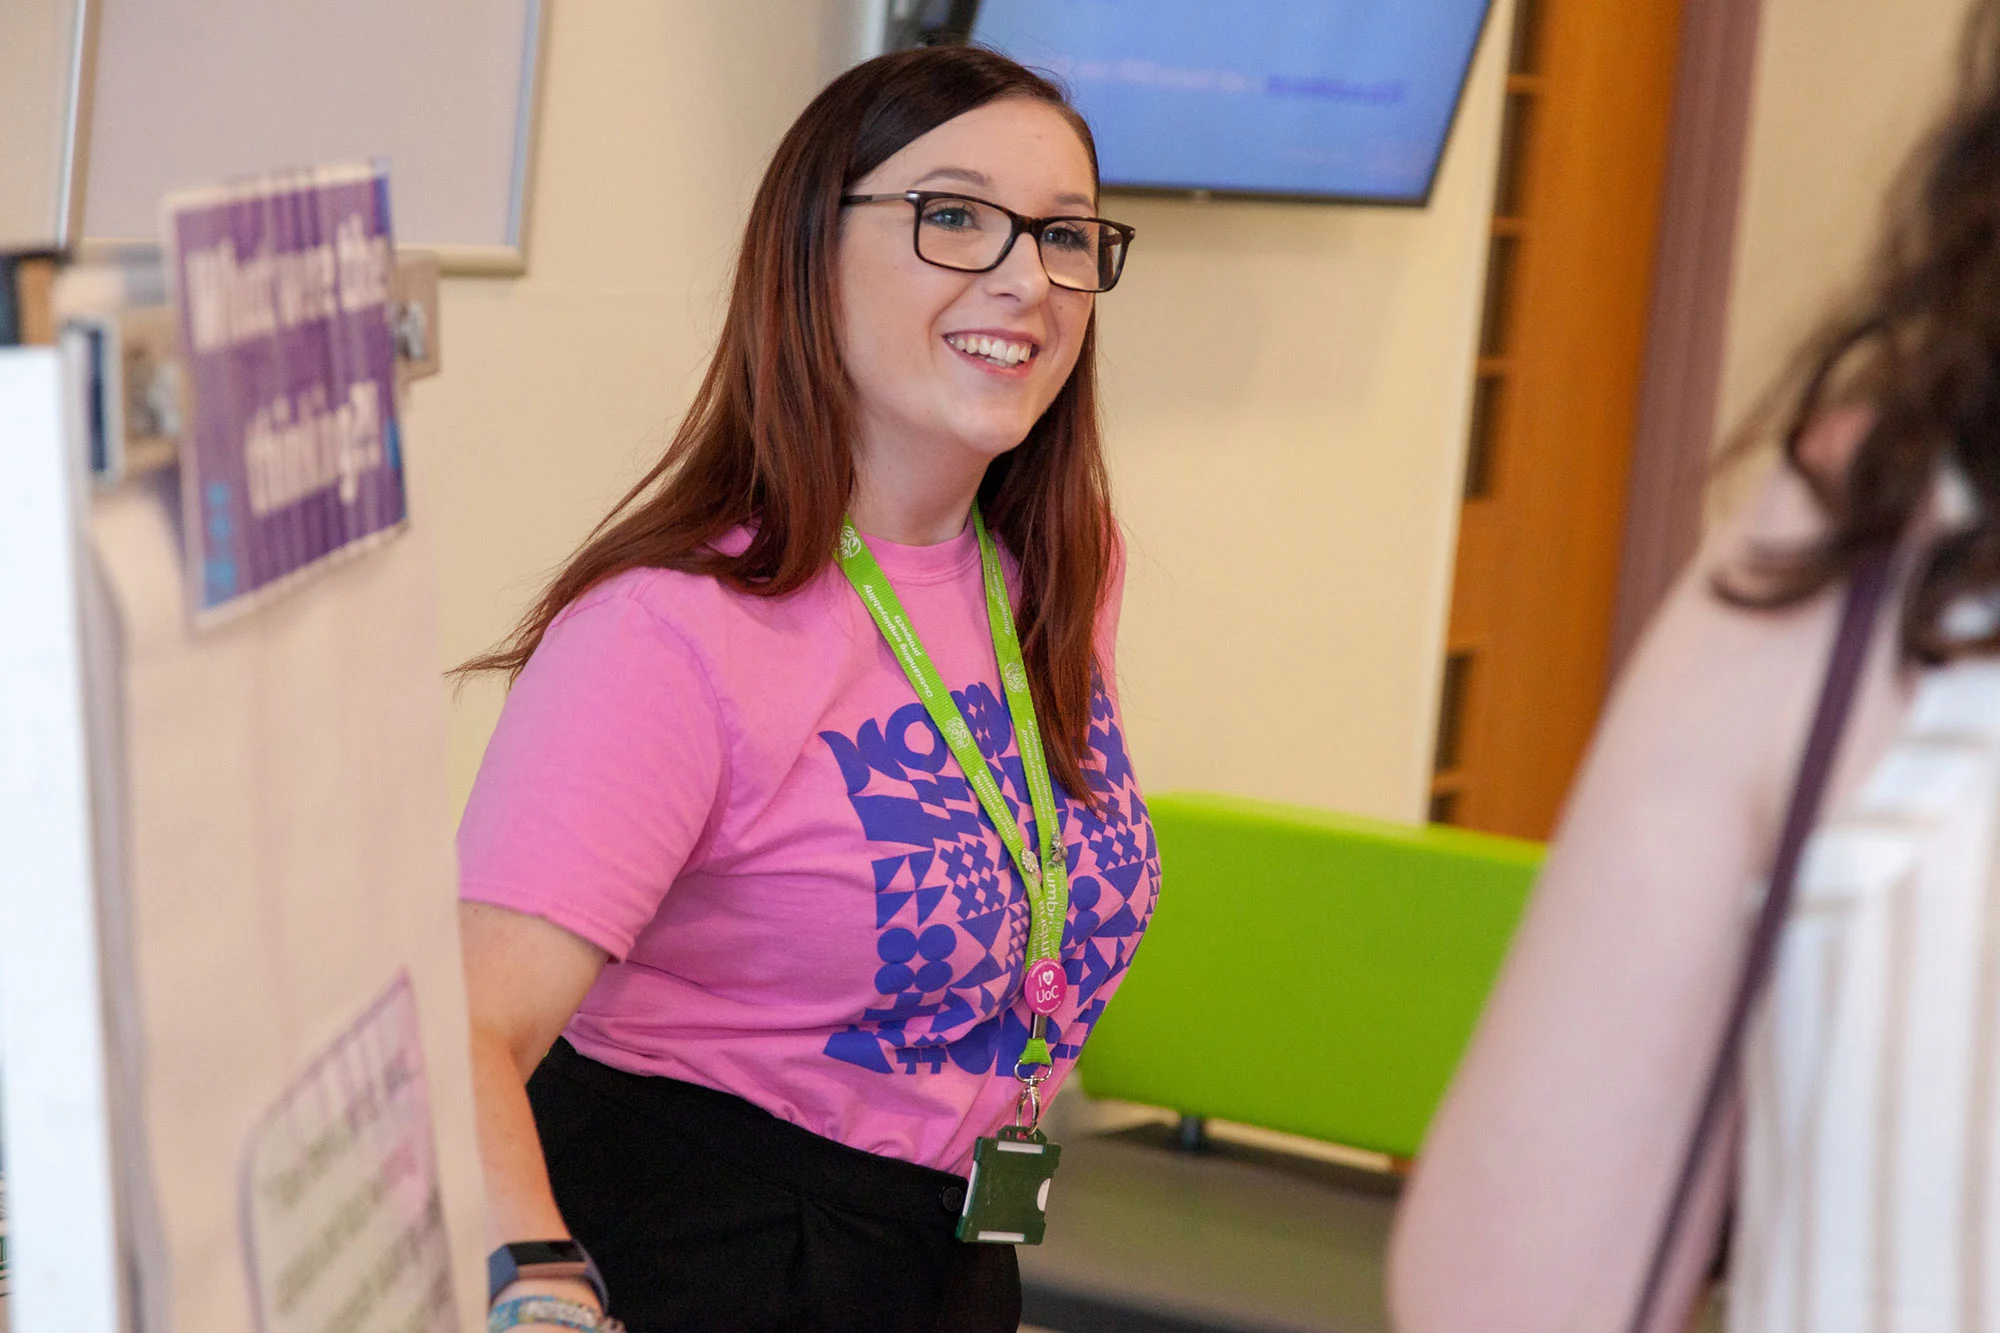 A University of Cumbria student helps people at an open day.